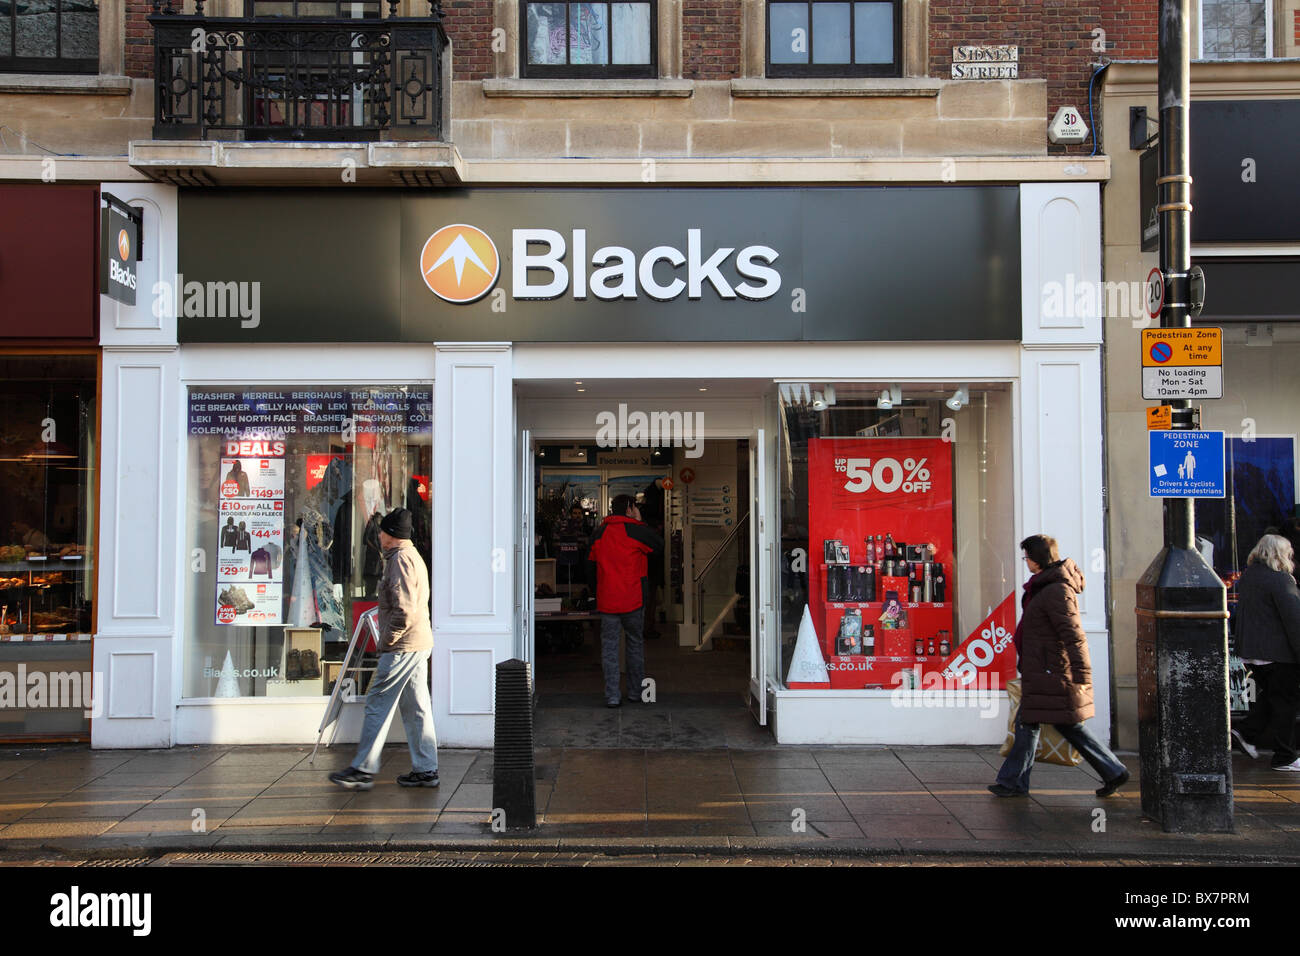 A Blacks outdoor clothing and camping store in Cambridge, England, U.K. Stock Photo